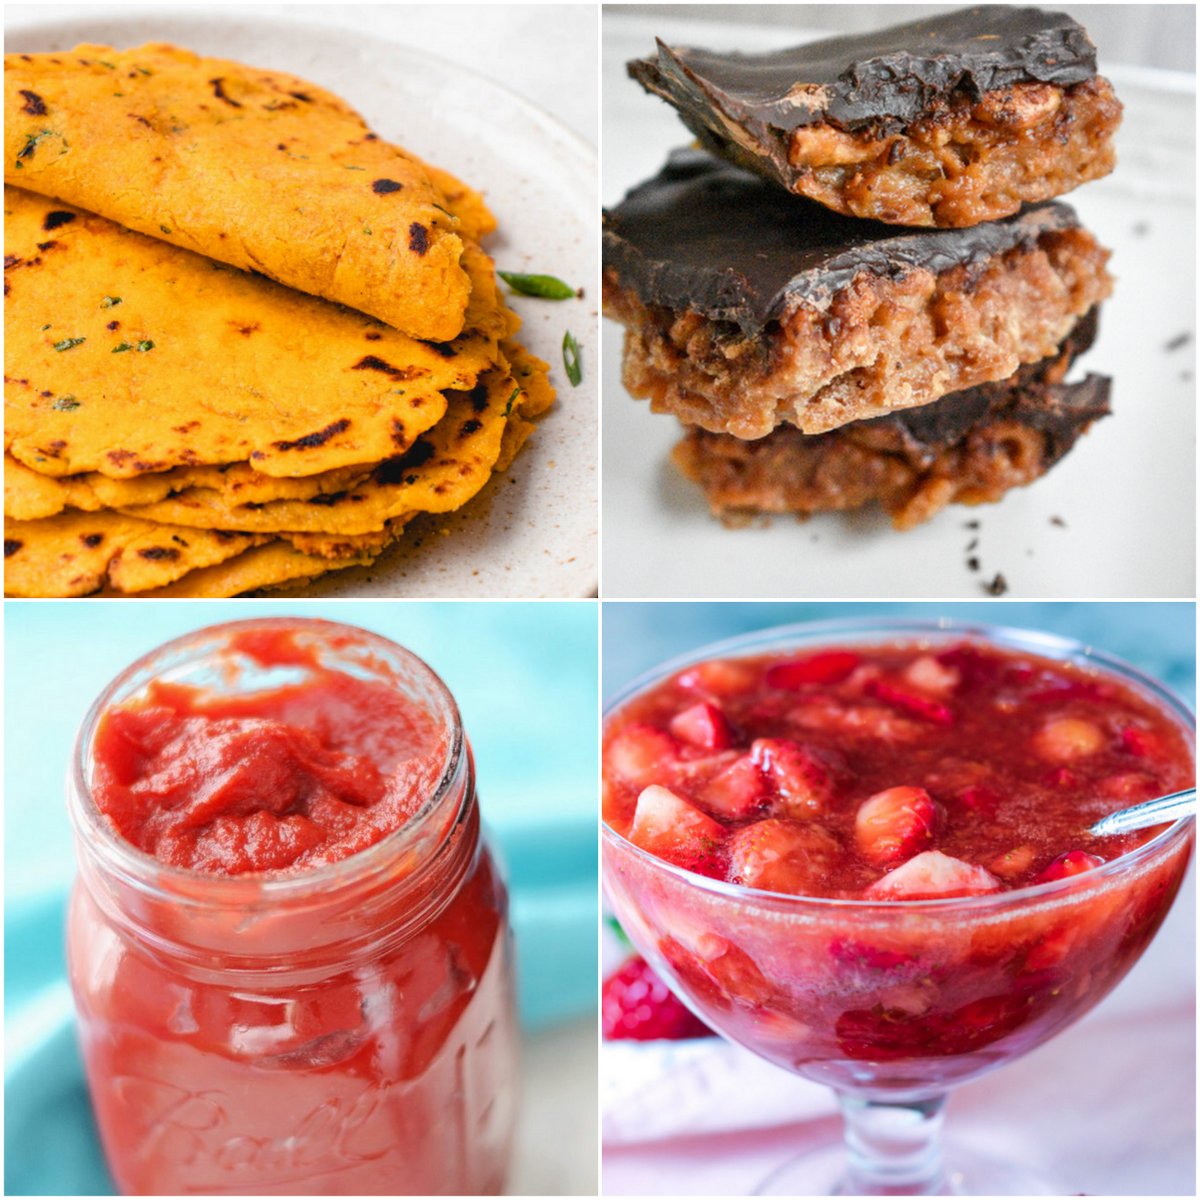 Paleo AIP Recipe Roundtable #367 | Phoenix Helix - *Featured Recipes: Sweet Potato Tortillas, "Chocolate" Crispy Squares, Instant Pot Nomato Ketchup, and Strawberry Topping.